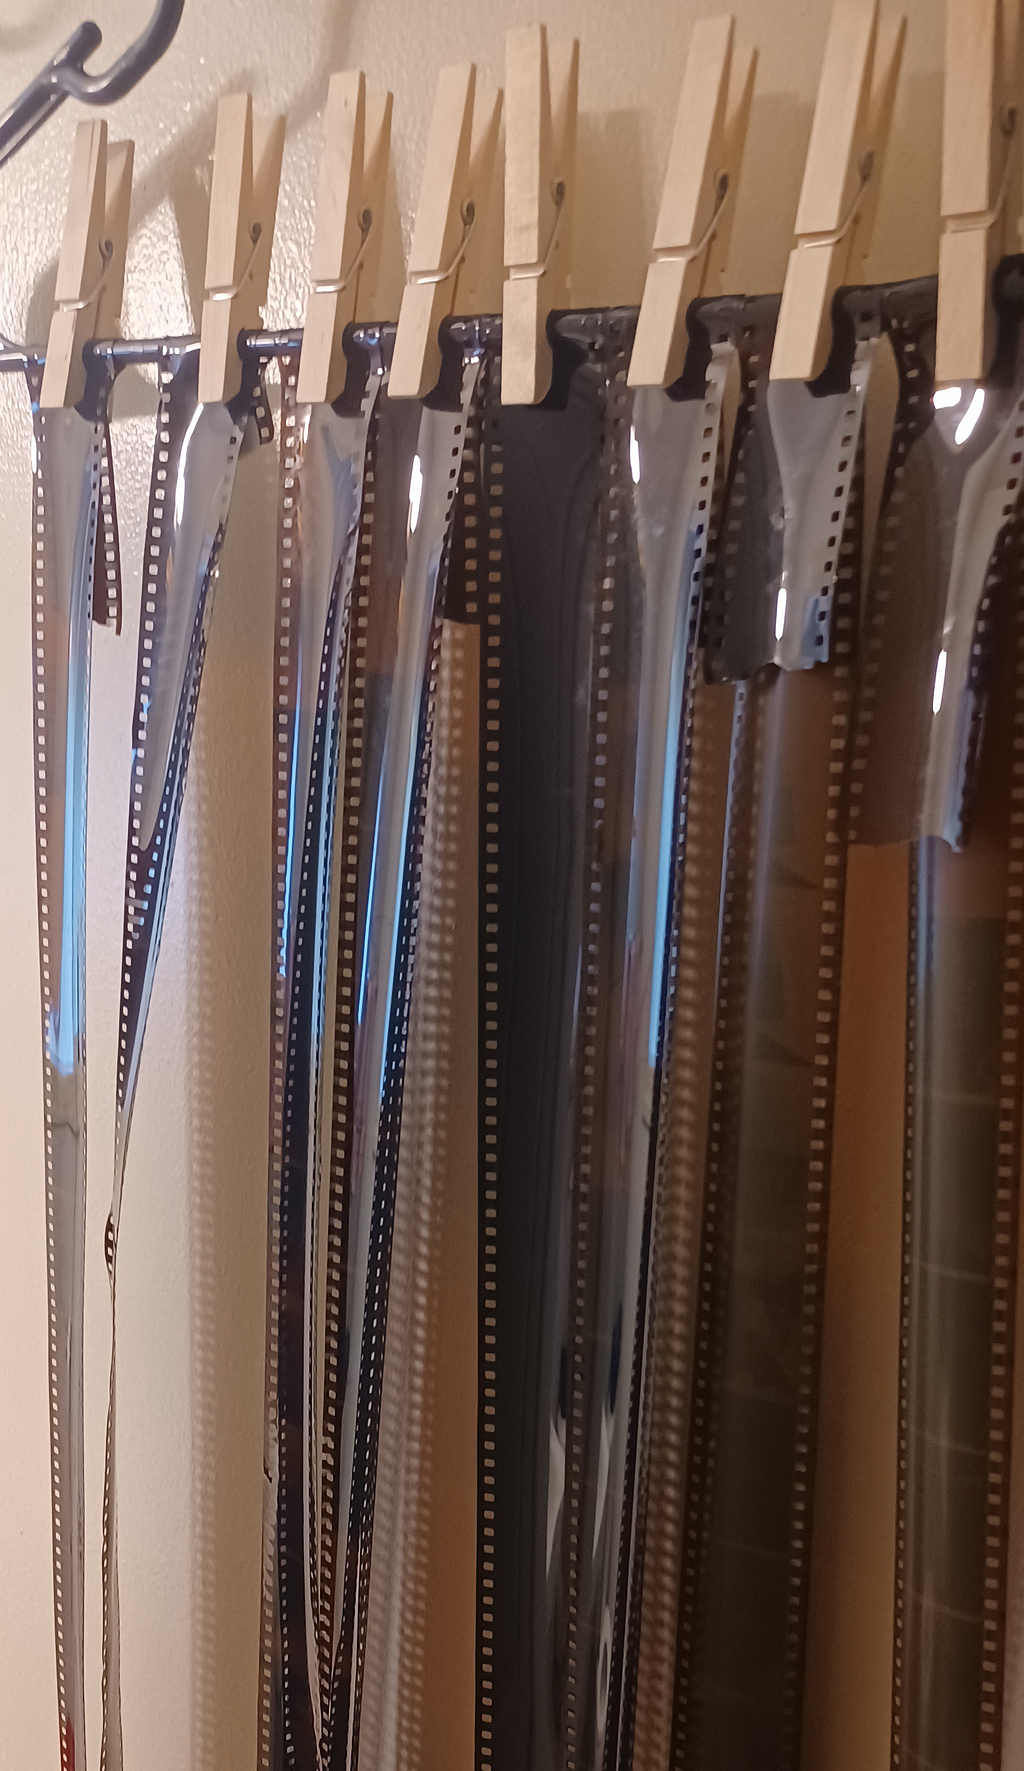 35mm film hanging up to dry with woodden clothes pins.